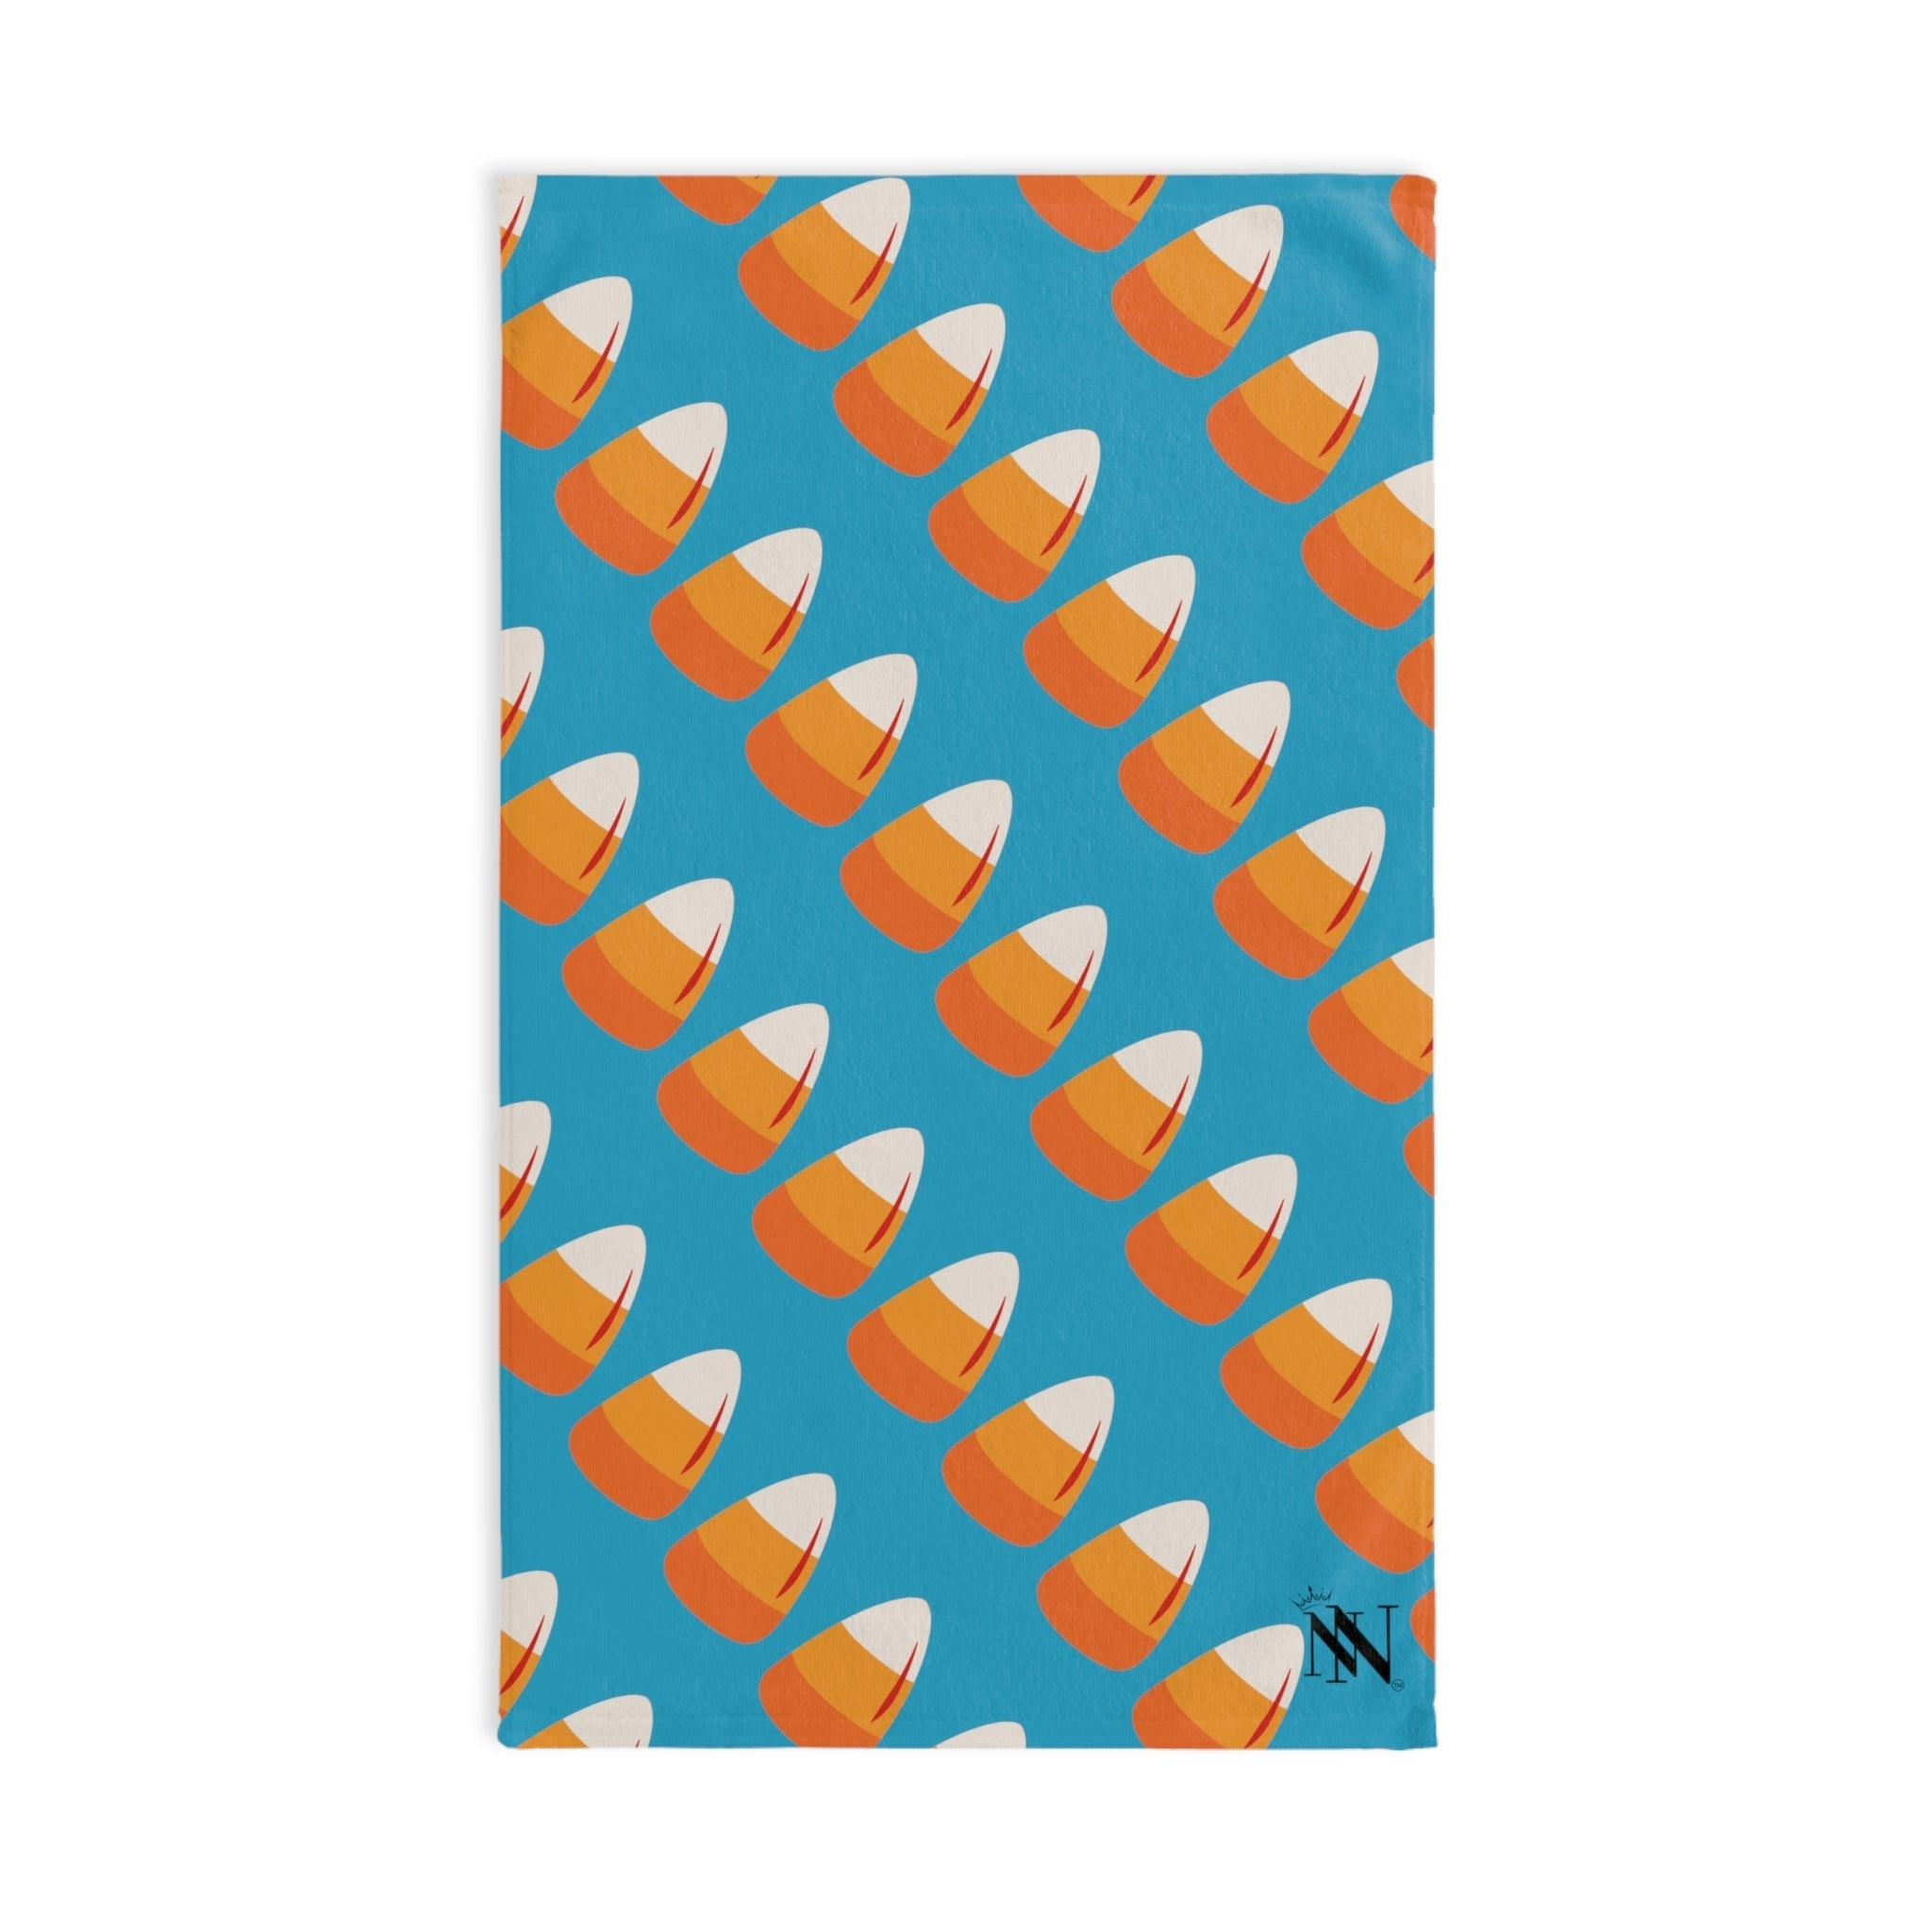 Candy Corn Teal | Novelty Gifts for Boyfriend, Funny Towel Romantic Gift for Wedding Couple Fiance First Year Anniversary Valentines, Party Gag Gifts, Joke Humor Cloth for Husband Men BF NECTAR NAPKINS